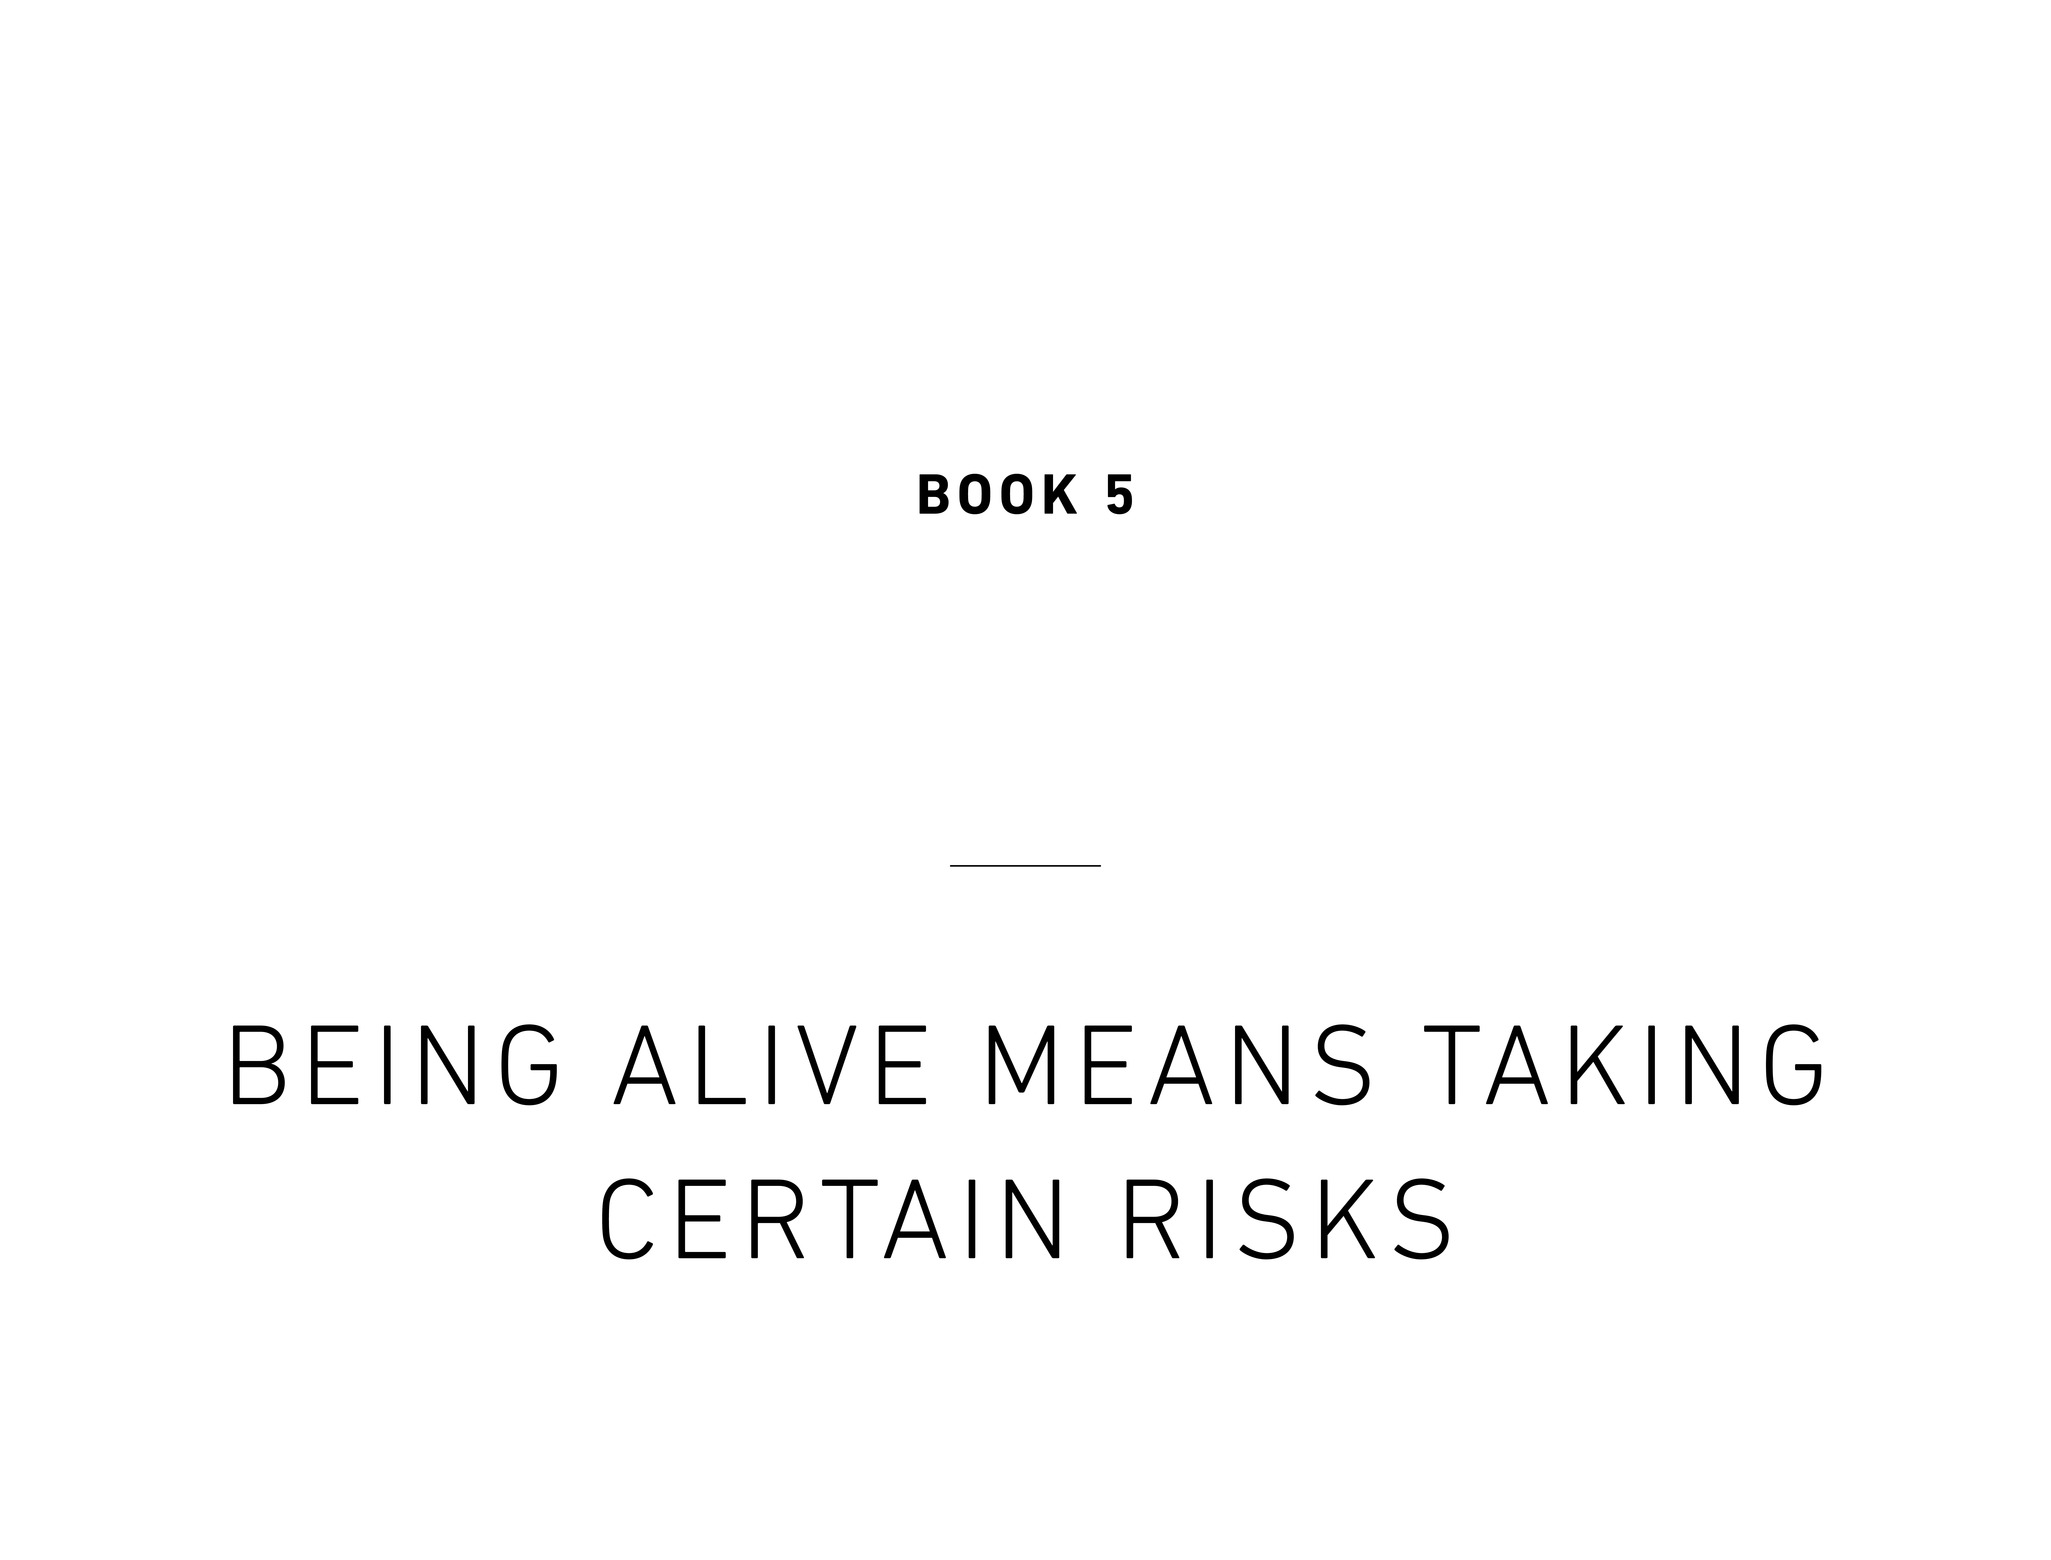 Book 5 Being Alive Means Taking Certain Risks